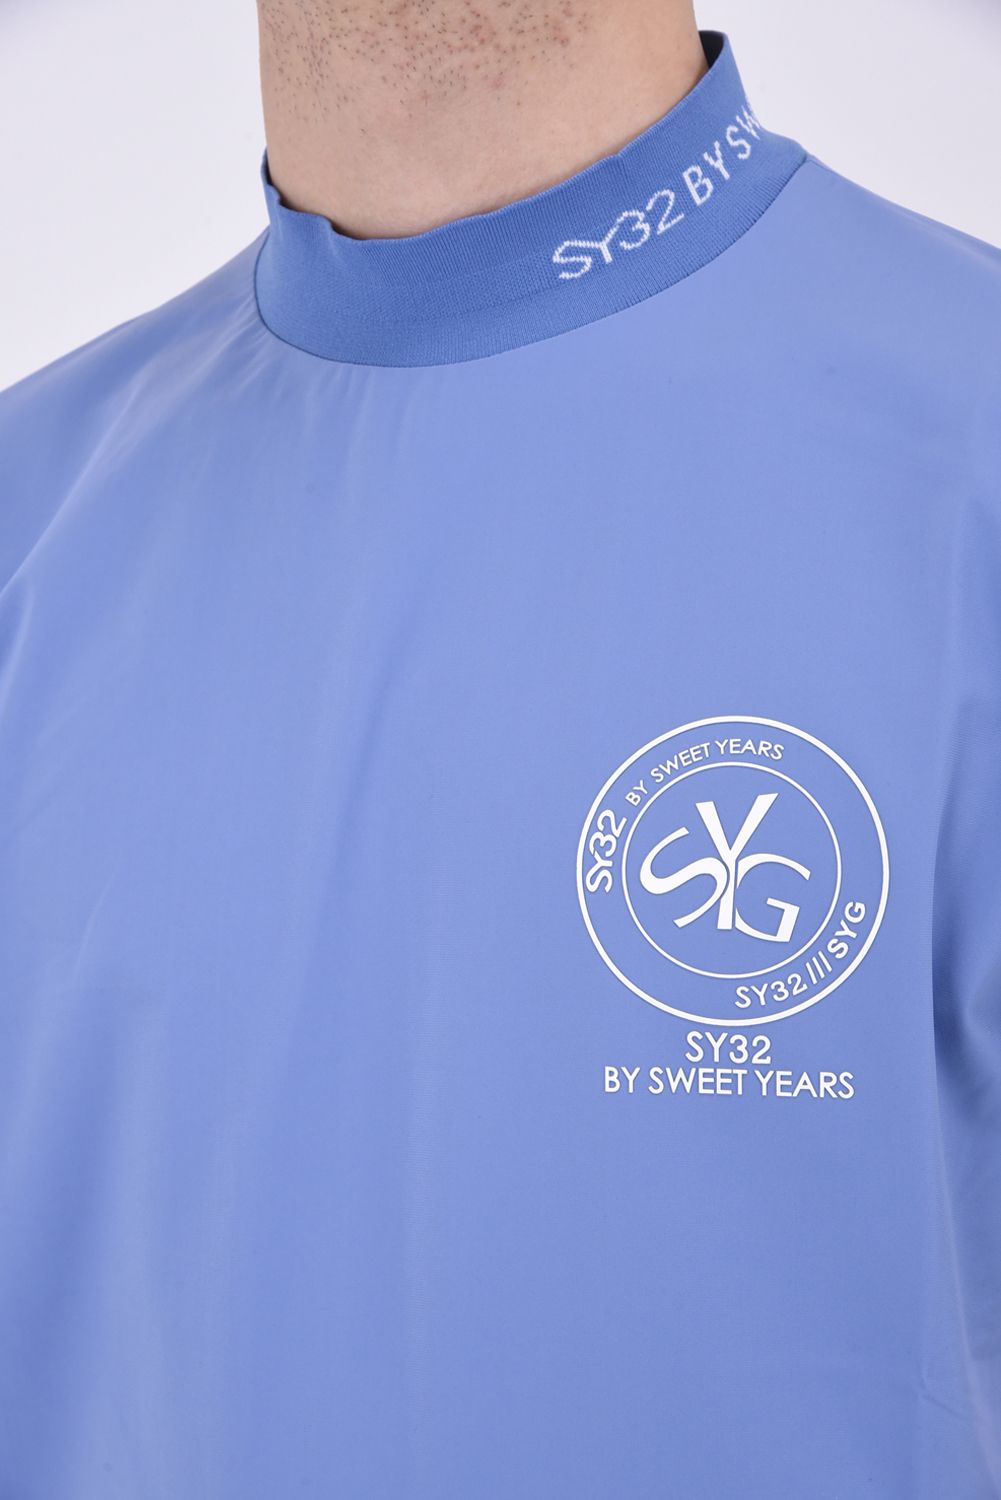 SY32 by SWEET YEARS GOLF - 【ABSOLUTE】 CARVICO 404 REVOLUTIONAL 